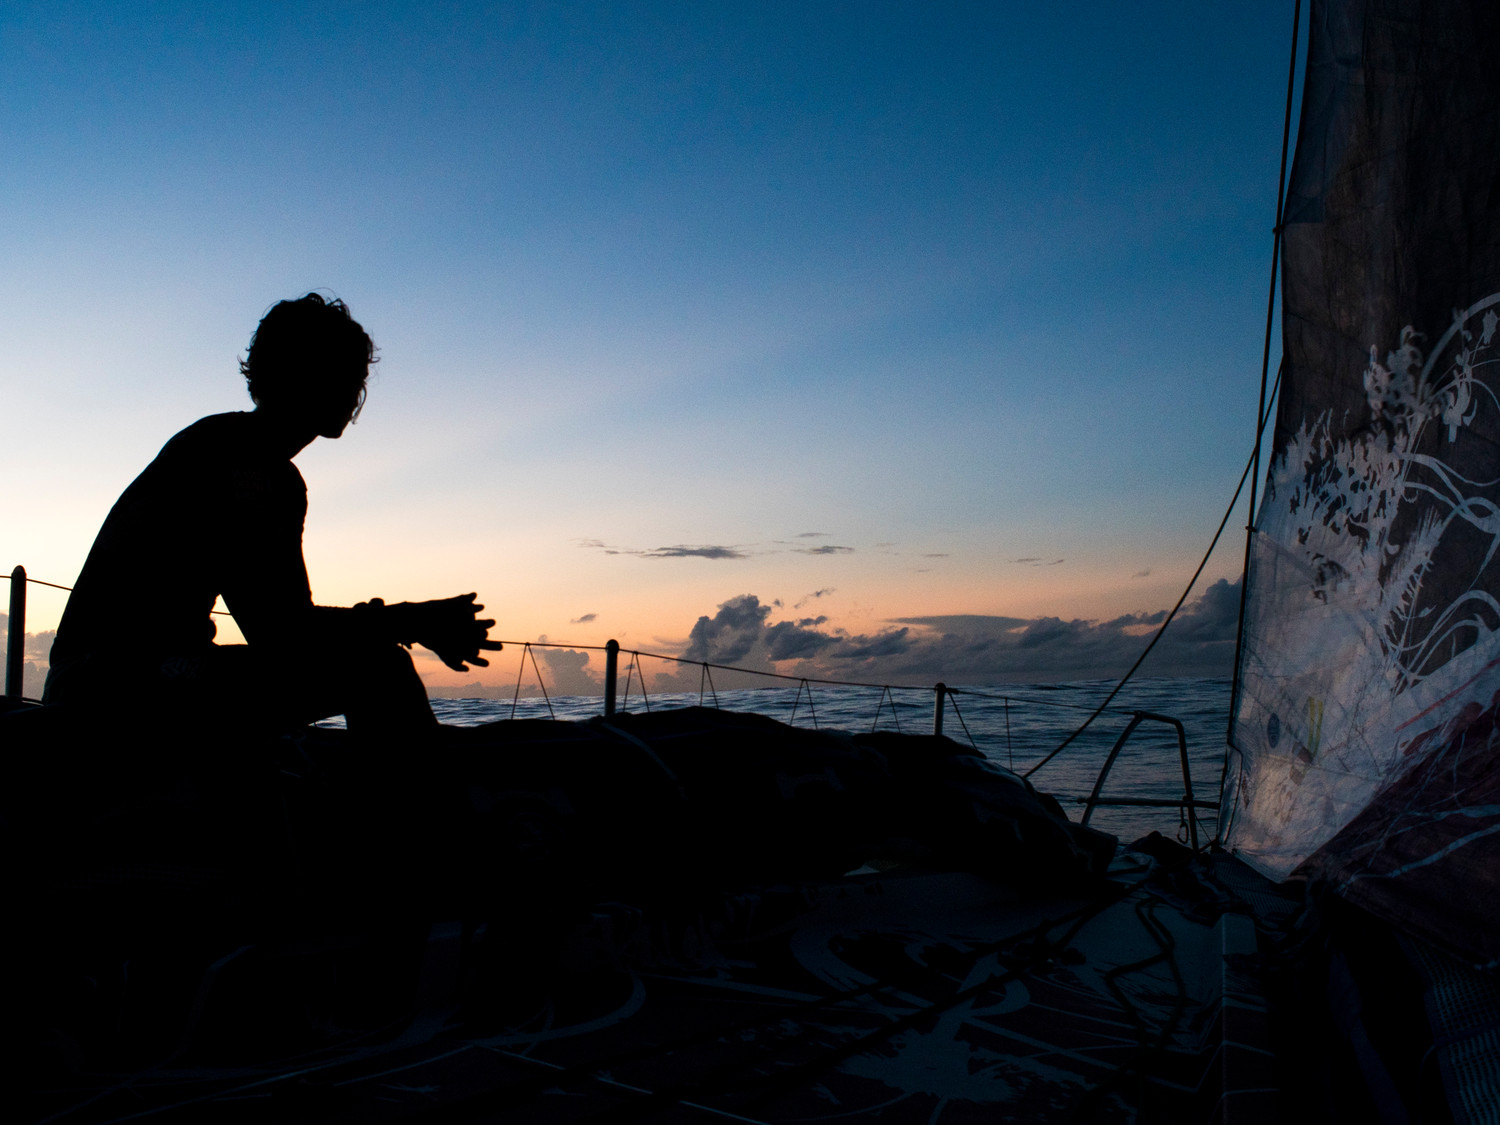 October 21, 2014.  Leg 1 onboard Team SCA. Sillhouette at sunset.